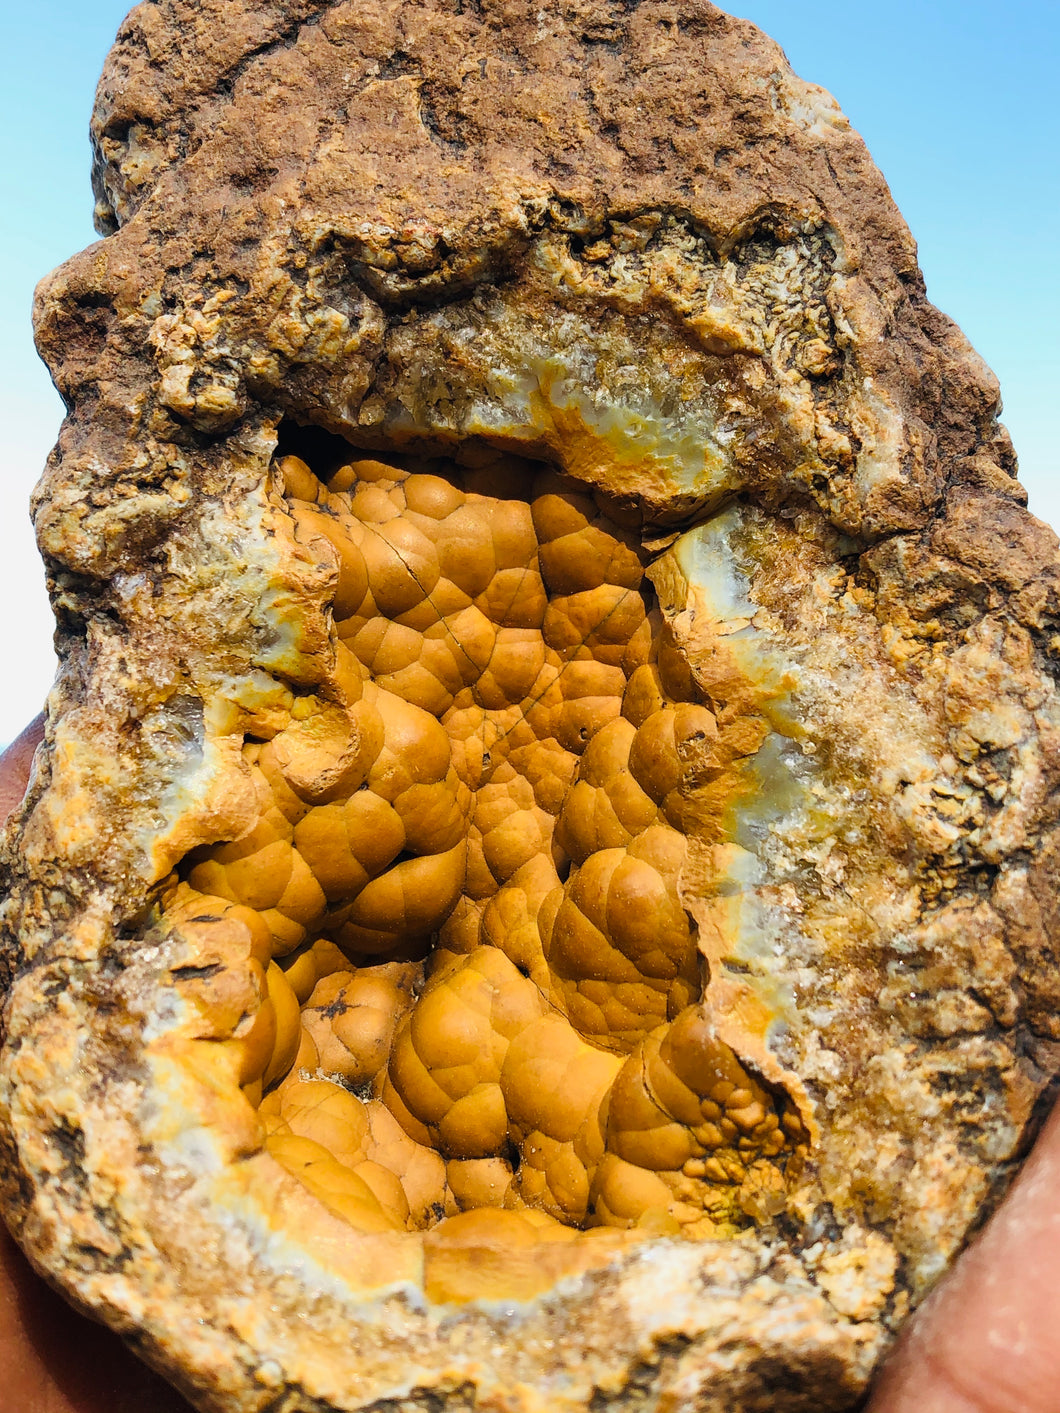 Agatized Coral